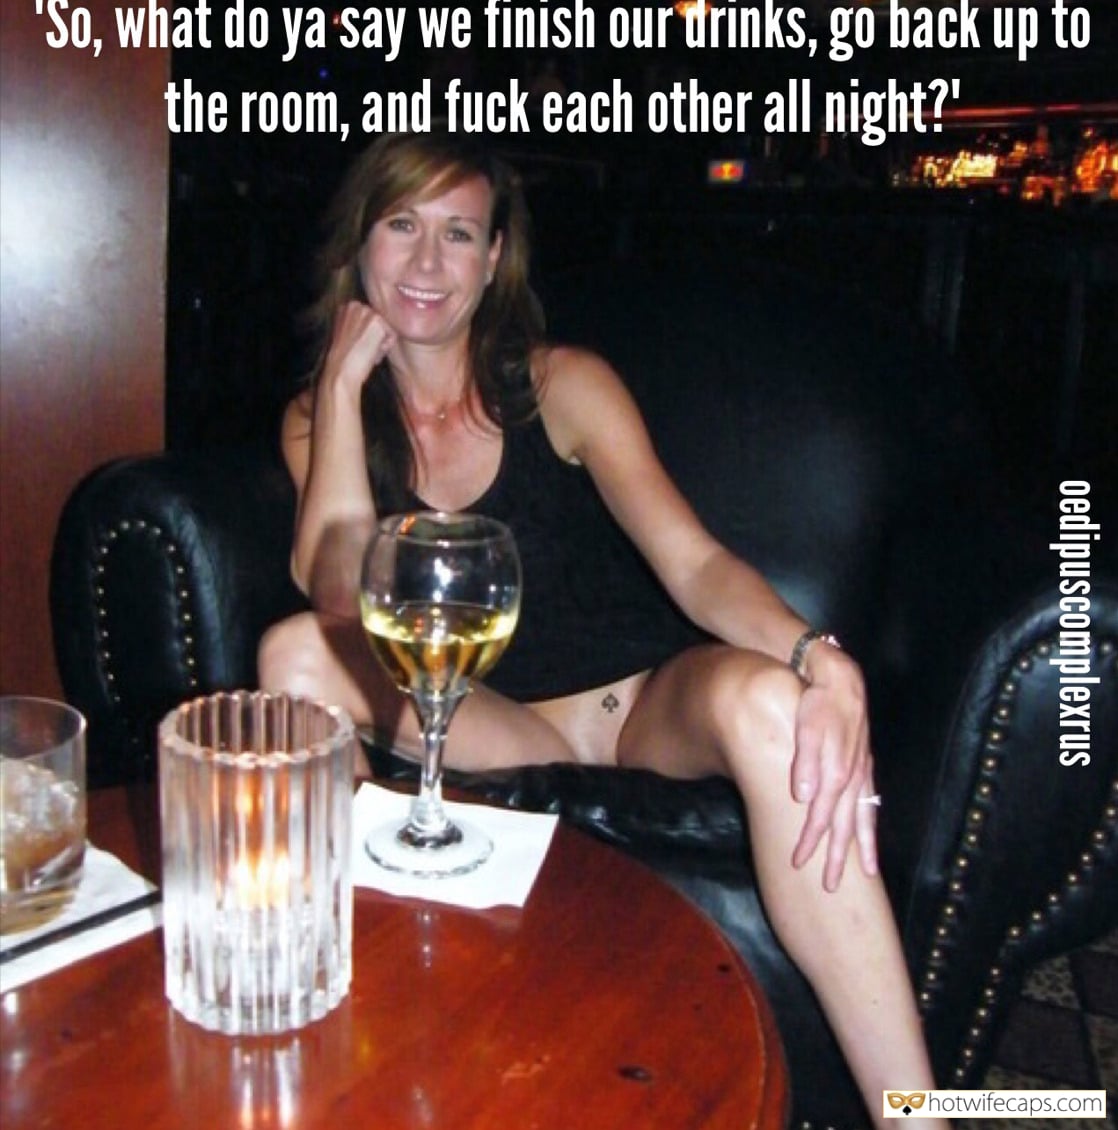 My Favorite hotwife caption: “So, what do ya say we finish our drinks, go back up to the room, and fuck each other all night?” oedipuscomplexrus She Talks Smooth as Fuck